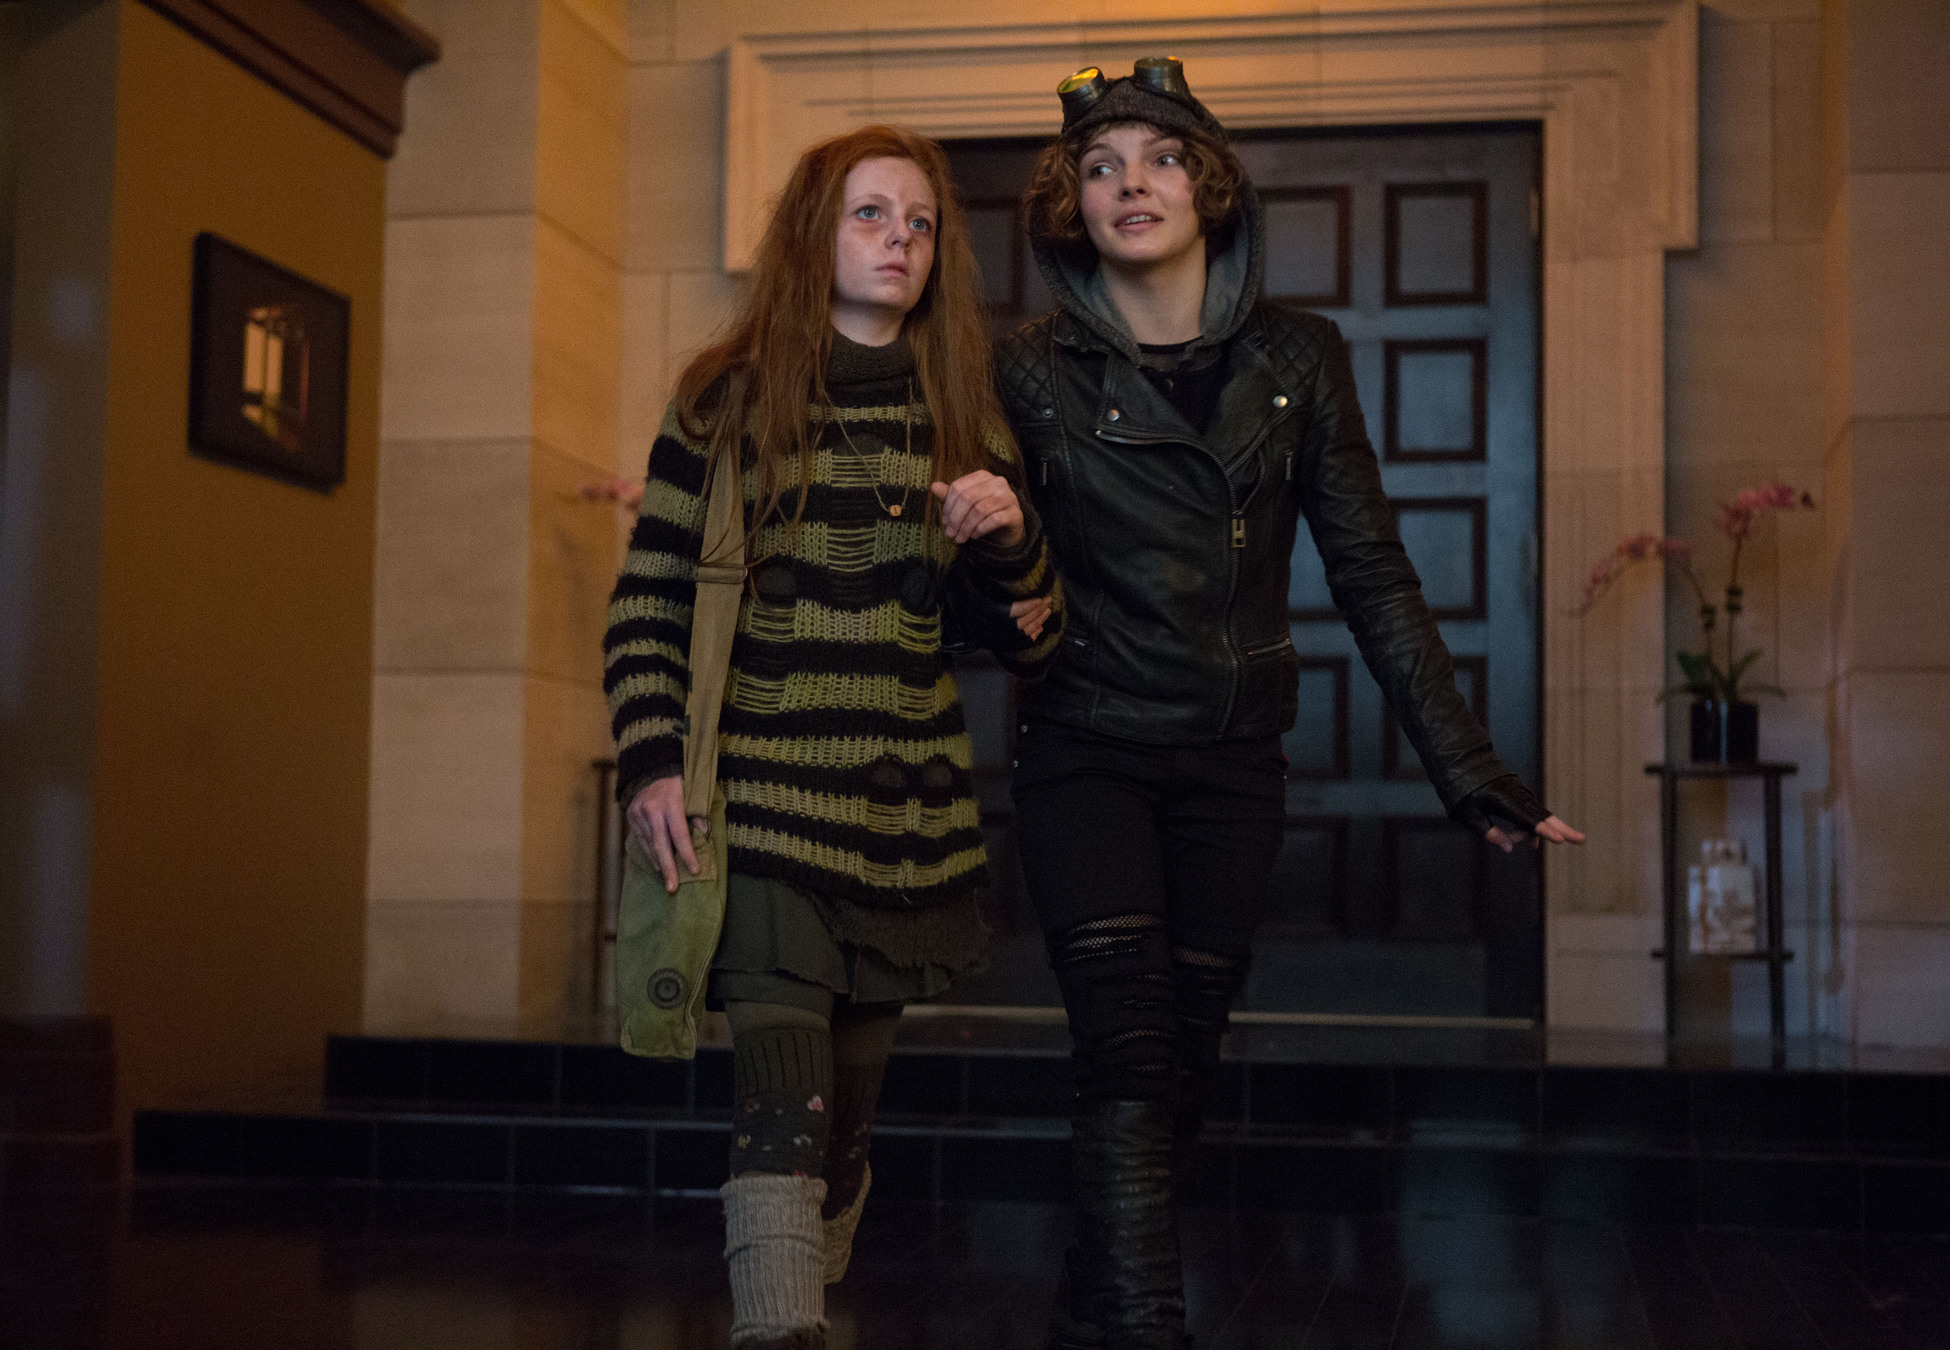 GOTHAM: Ivy (guest star Clare Foley, L) and Selina Kyle (Camren Bicondova, R) find refuge in Barbara Kean's apartment in the "Rogues' Gallery" episode of GOTHAM airing Monday, Jan. 5 (8:00-9:00 PM ET/PT) on FOX. Â©2014 Fox Broadcasting Co. Cr: Jessica Miglio/FOX